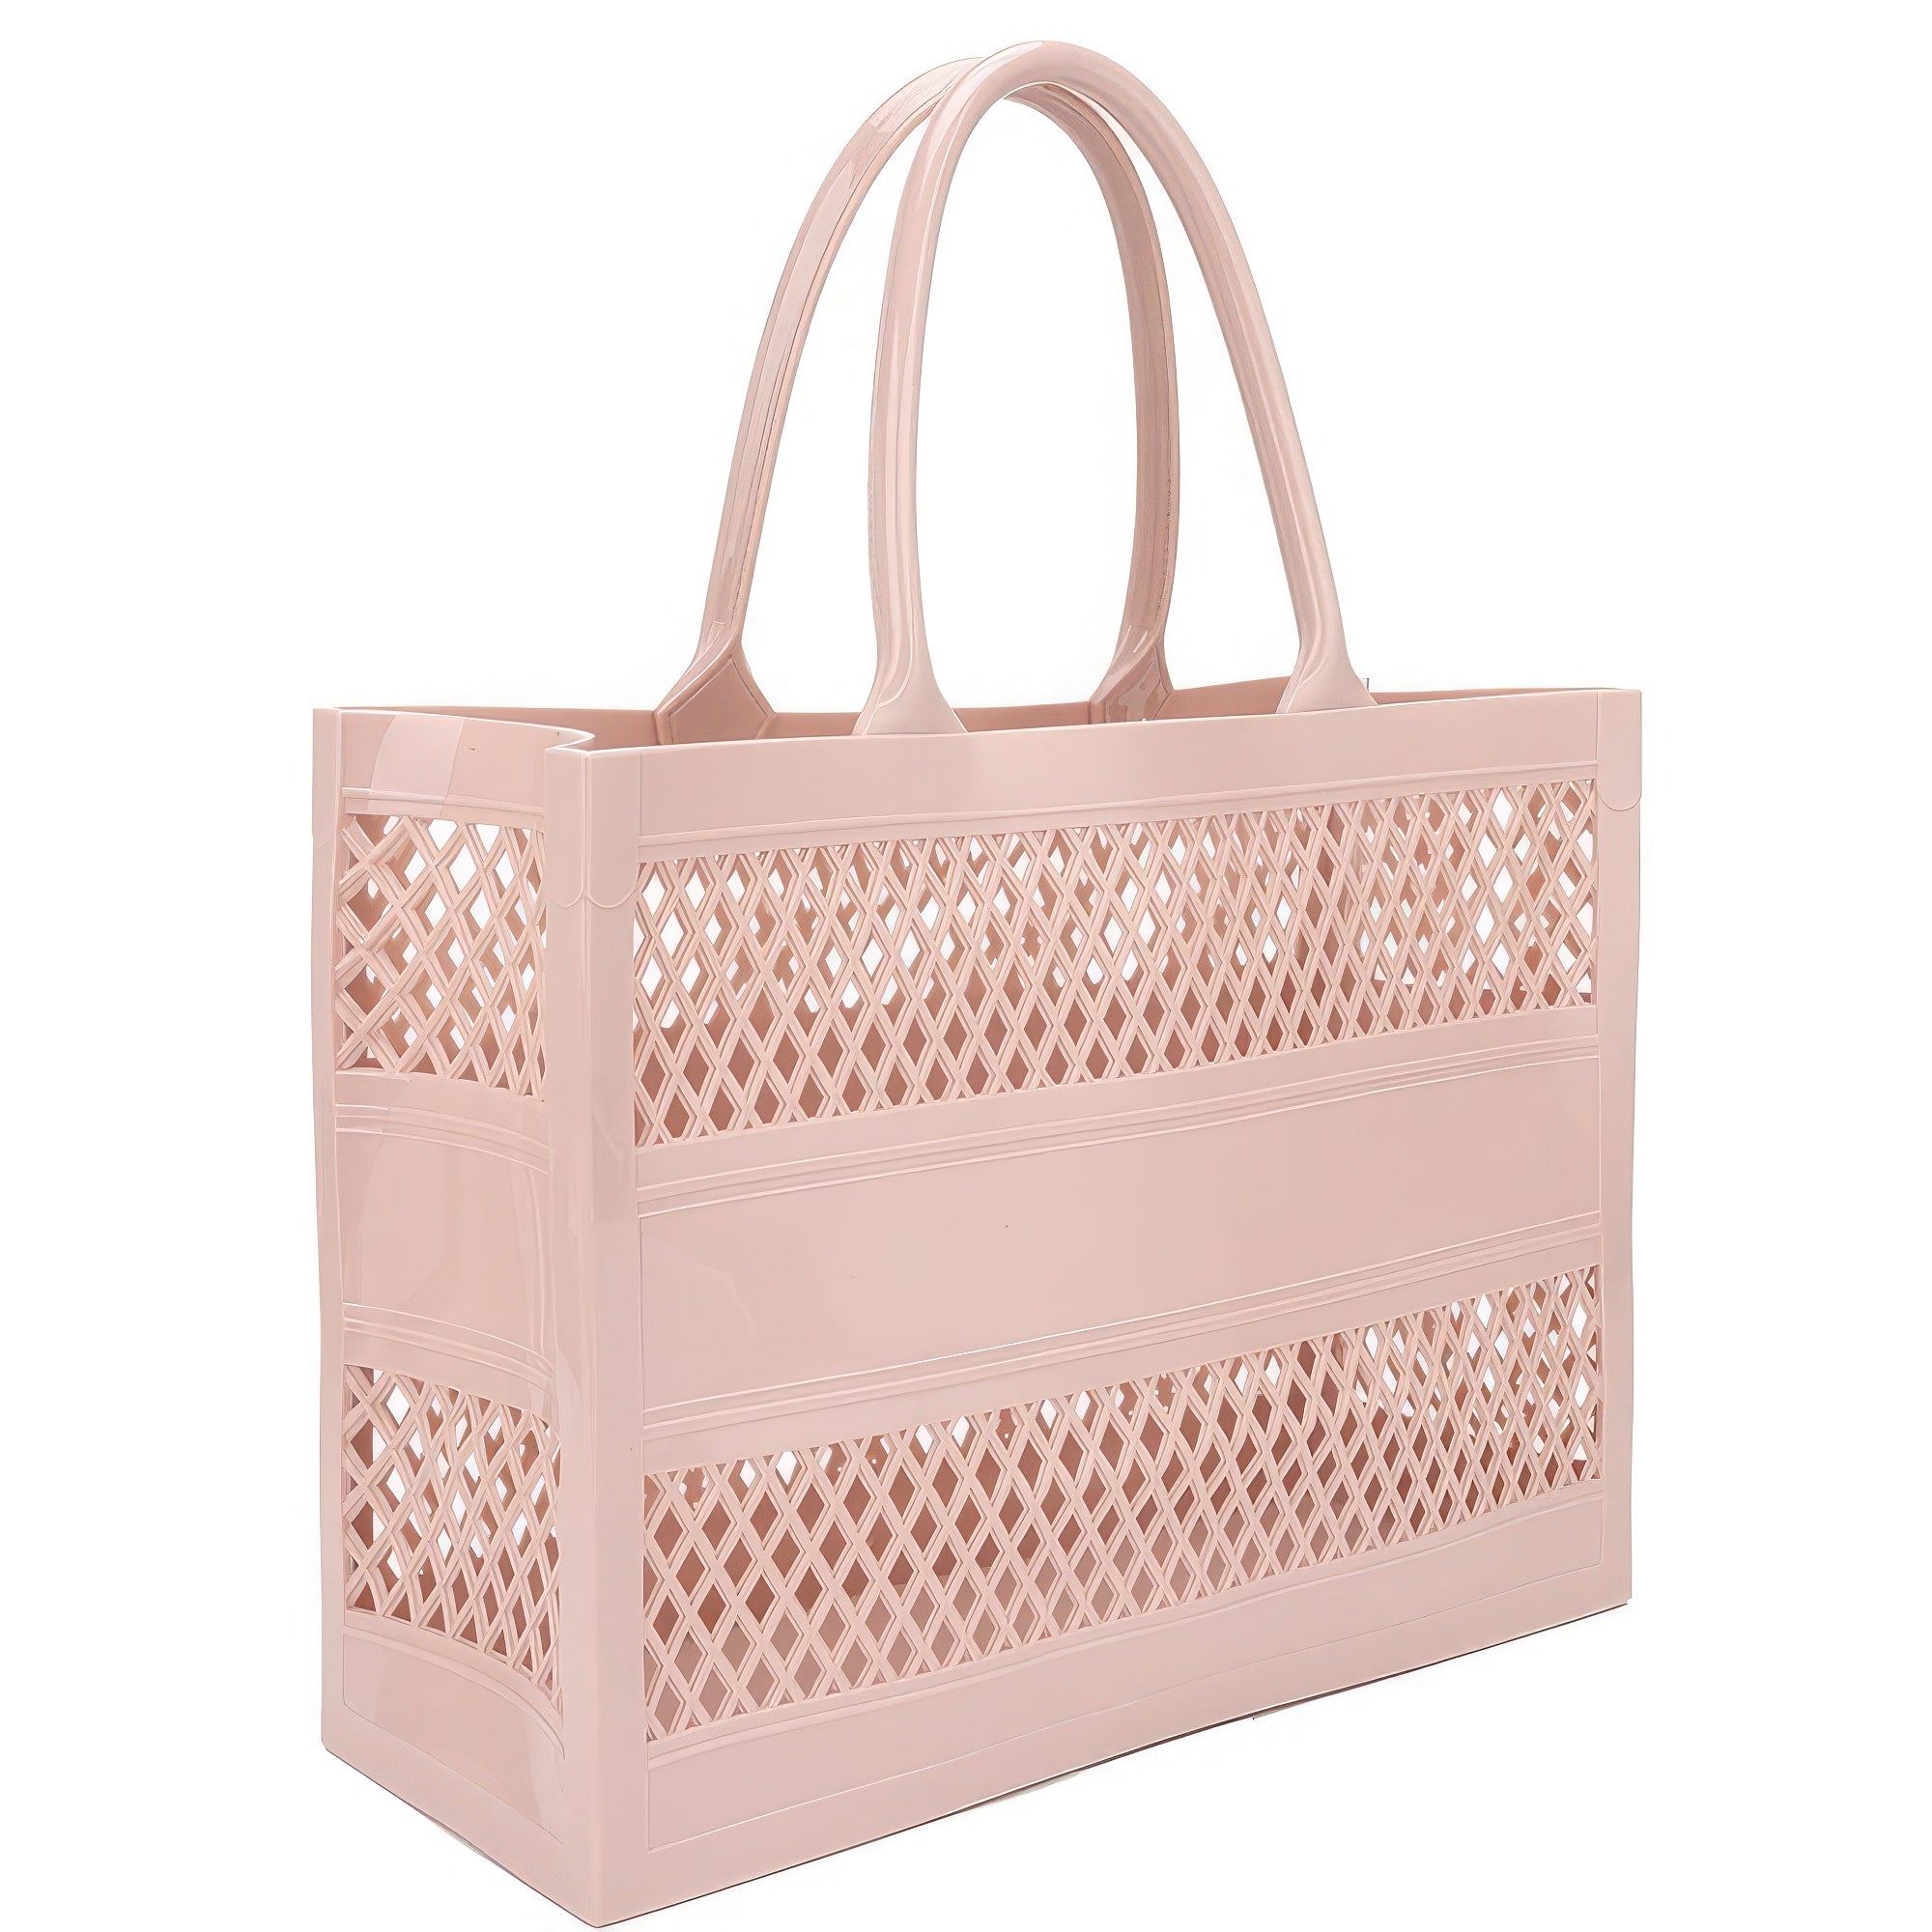 THE NOREEN Smooth Vented Handle Tote Bag